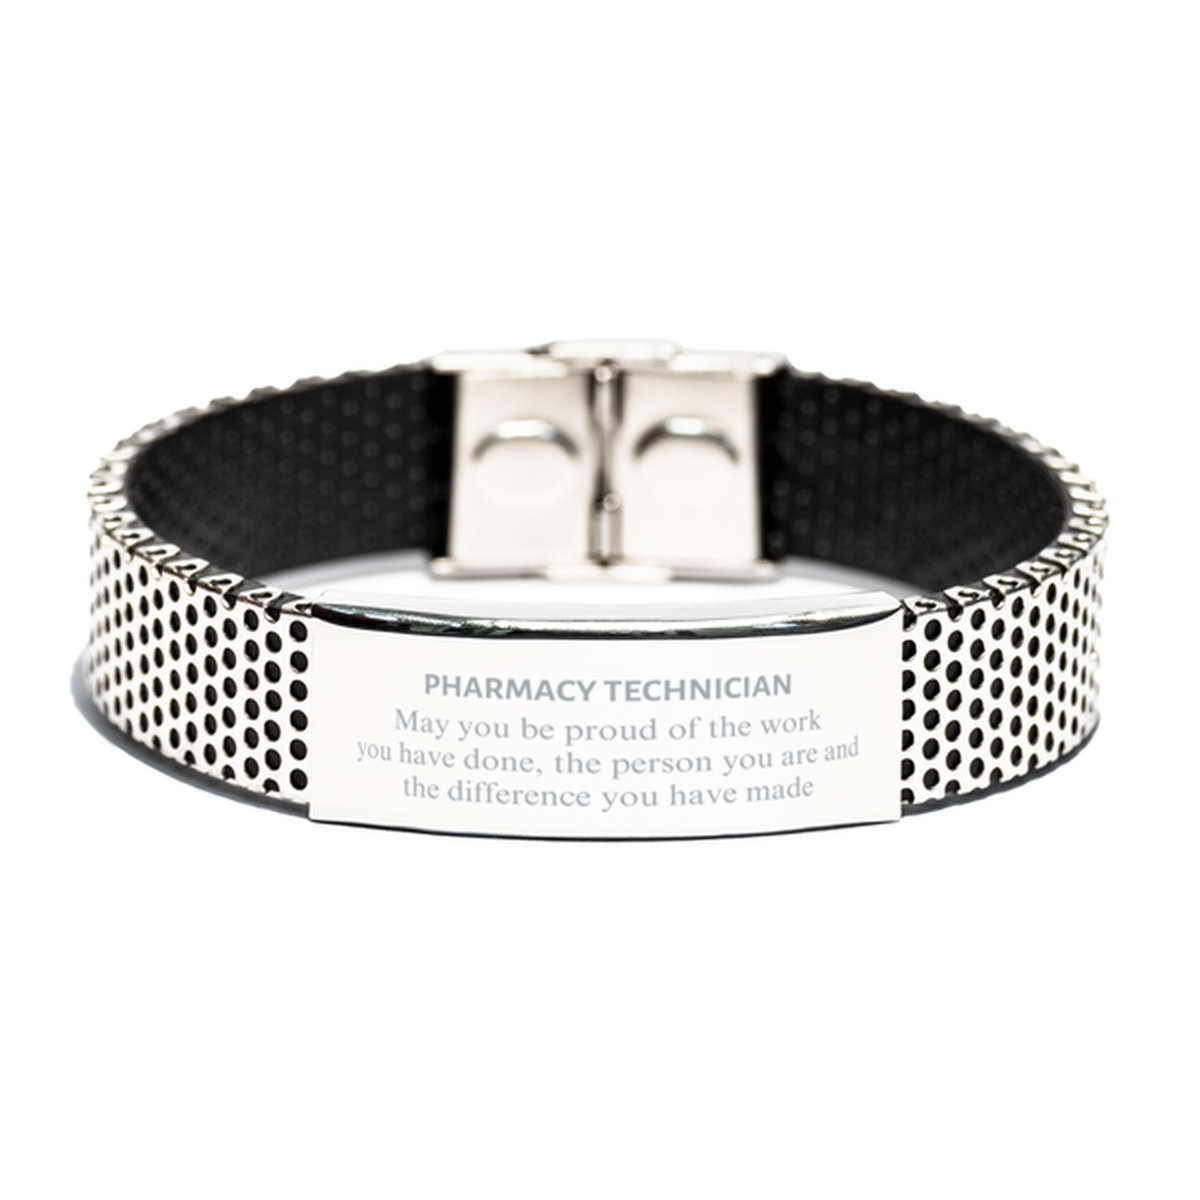 Pharmacy Technician May you be proud of the work you have done, Retirement Pharmacy Technician Stainless Steel Bracelet for Colleague Appreciation Gifts Amazing for Pharmacy Technician